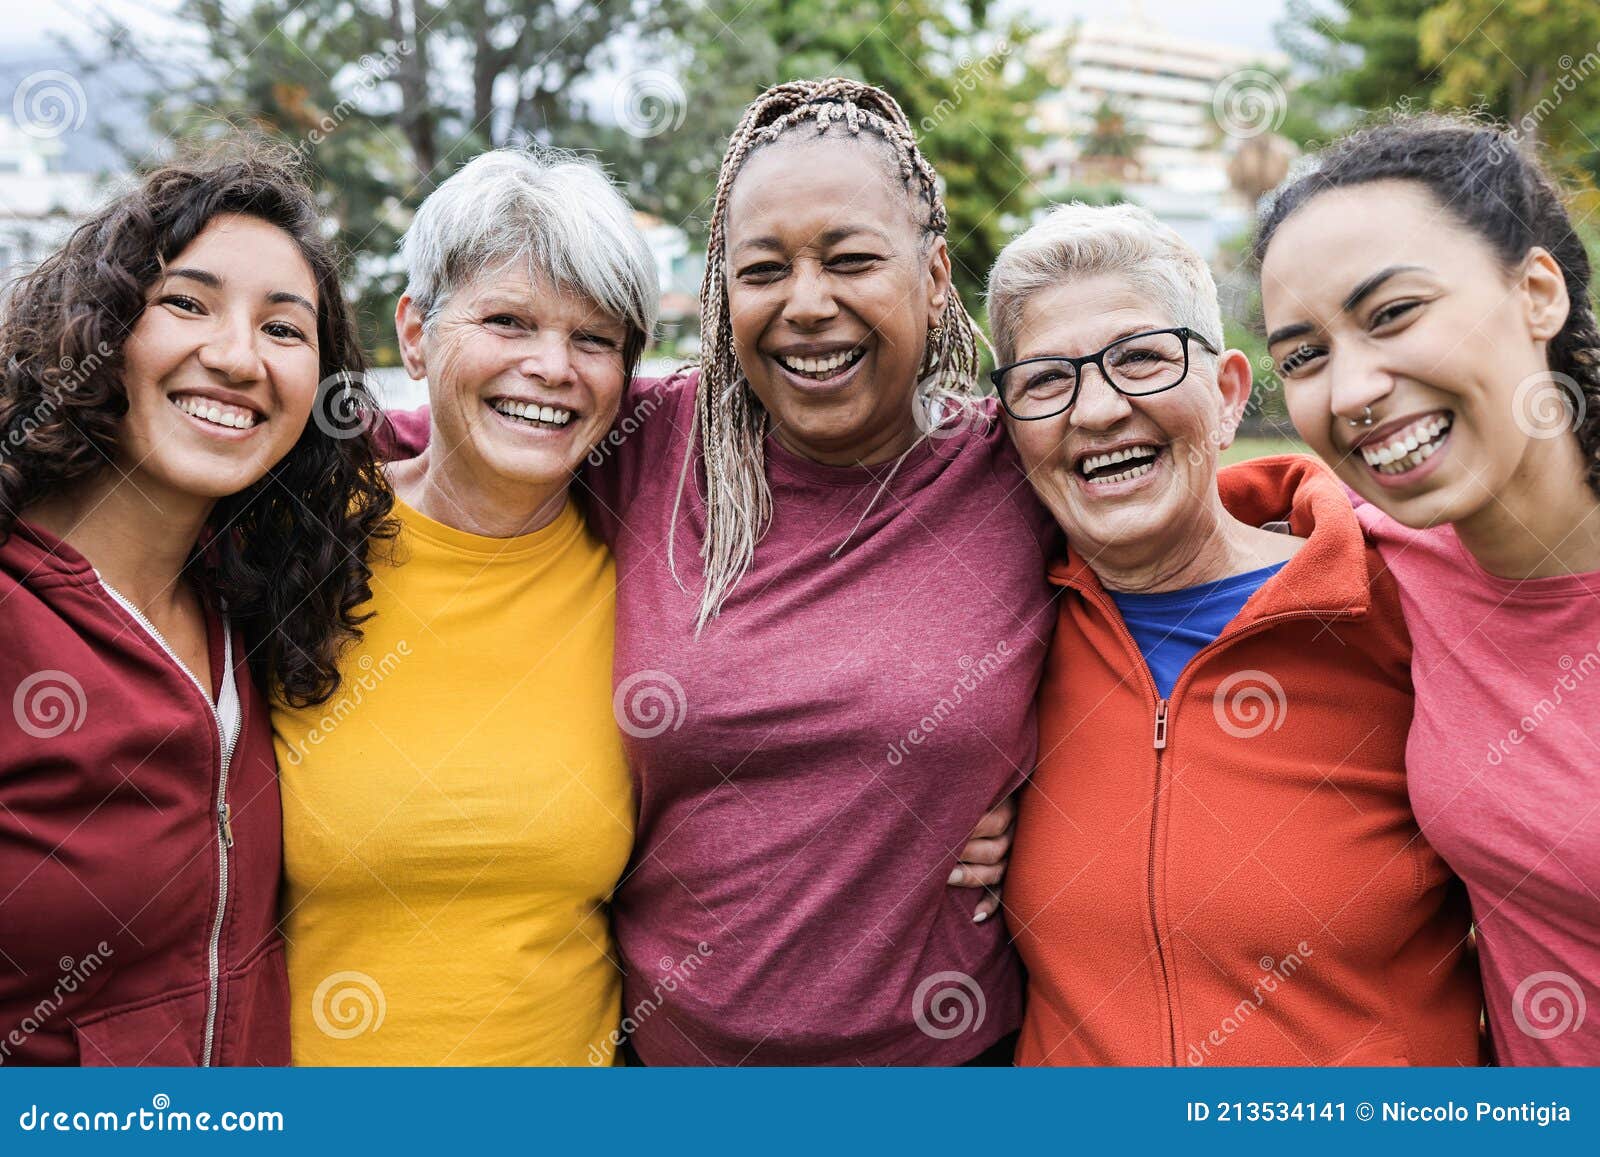 happy multi generational women having fun together - multiracial friends smiling on camera after sport workout outdoor - main